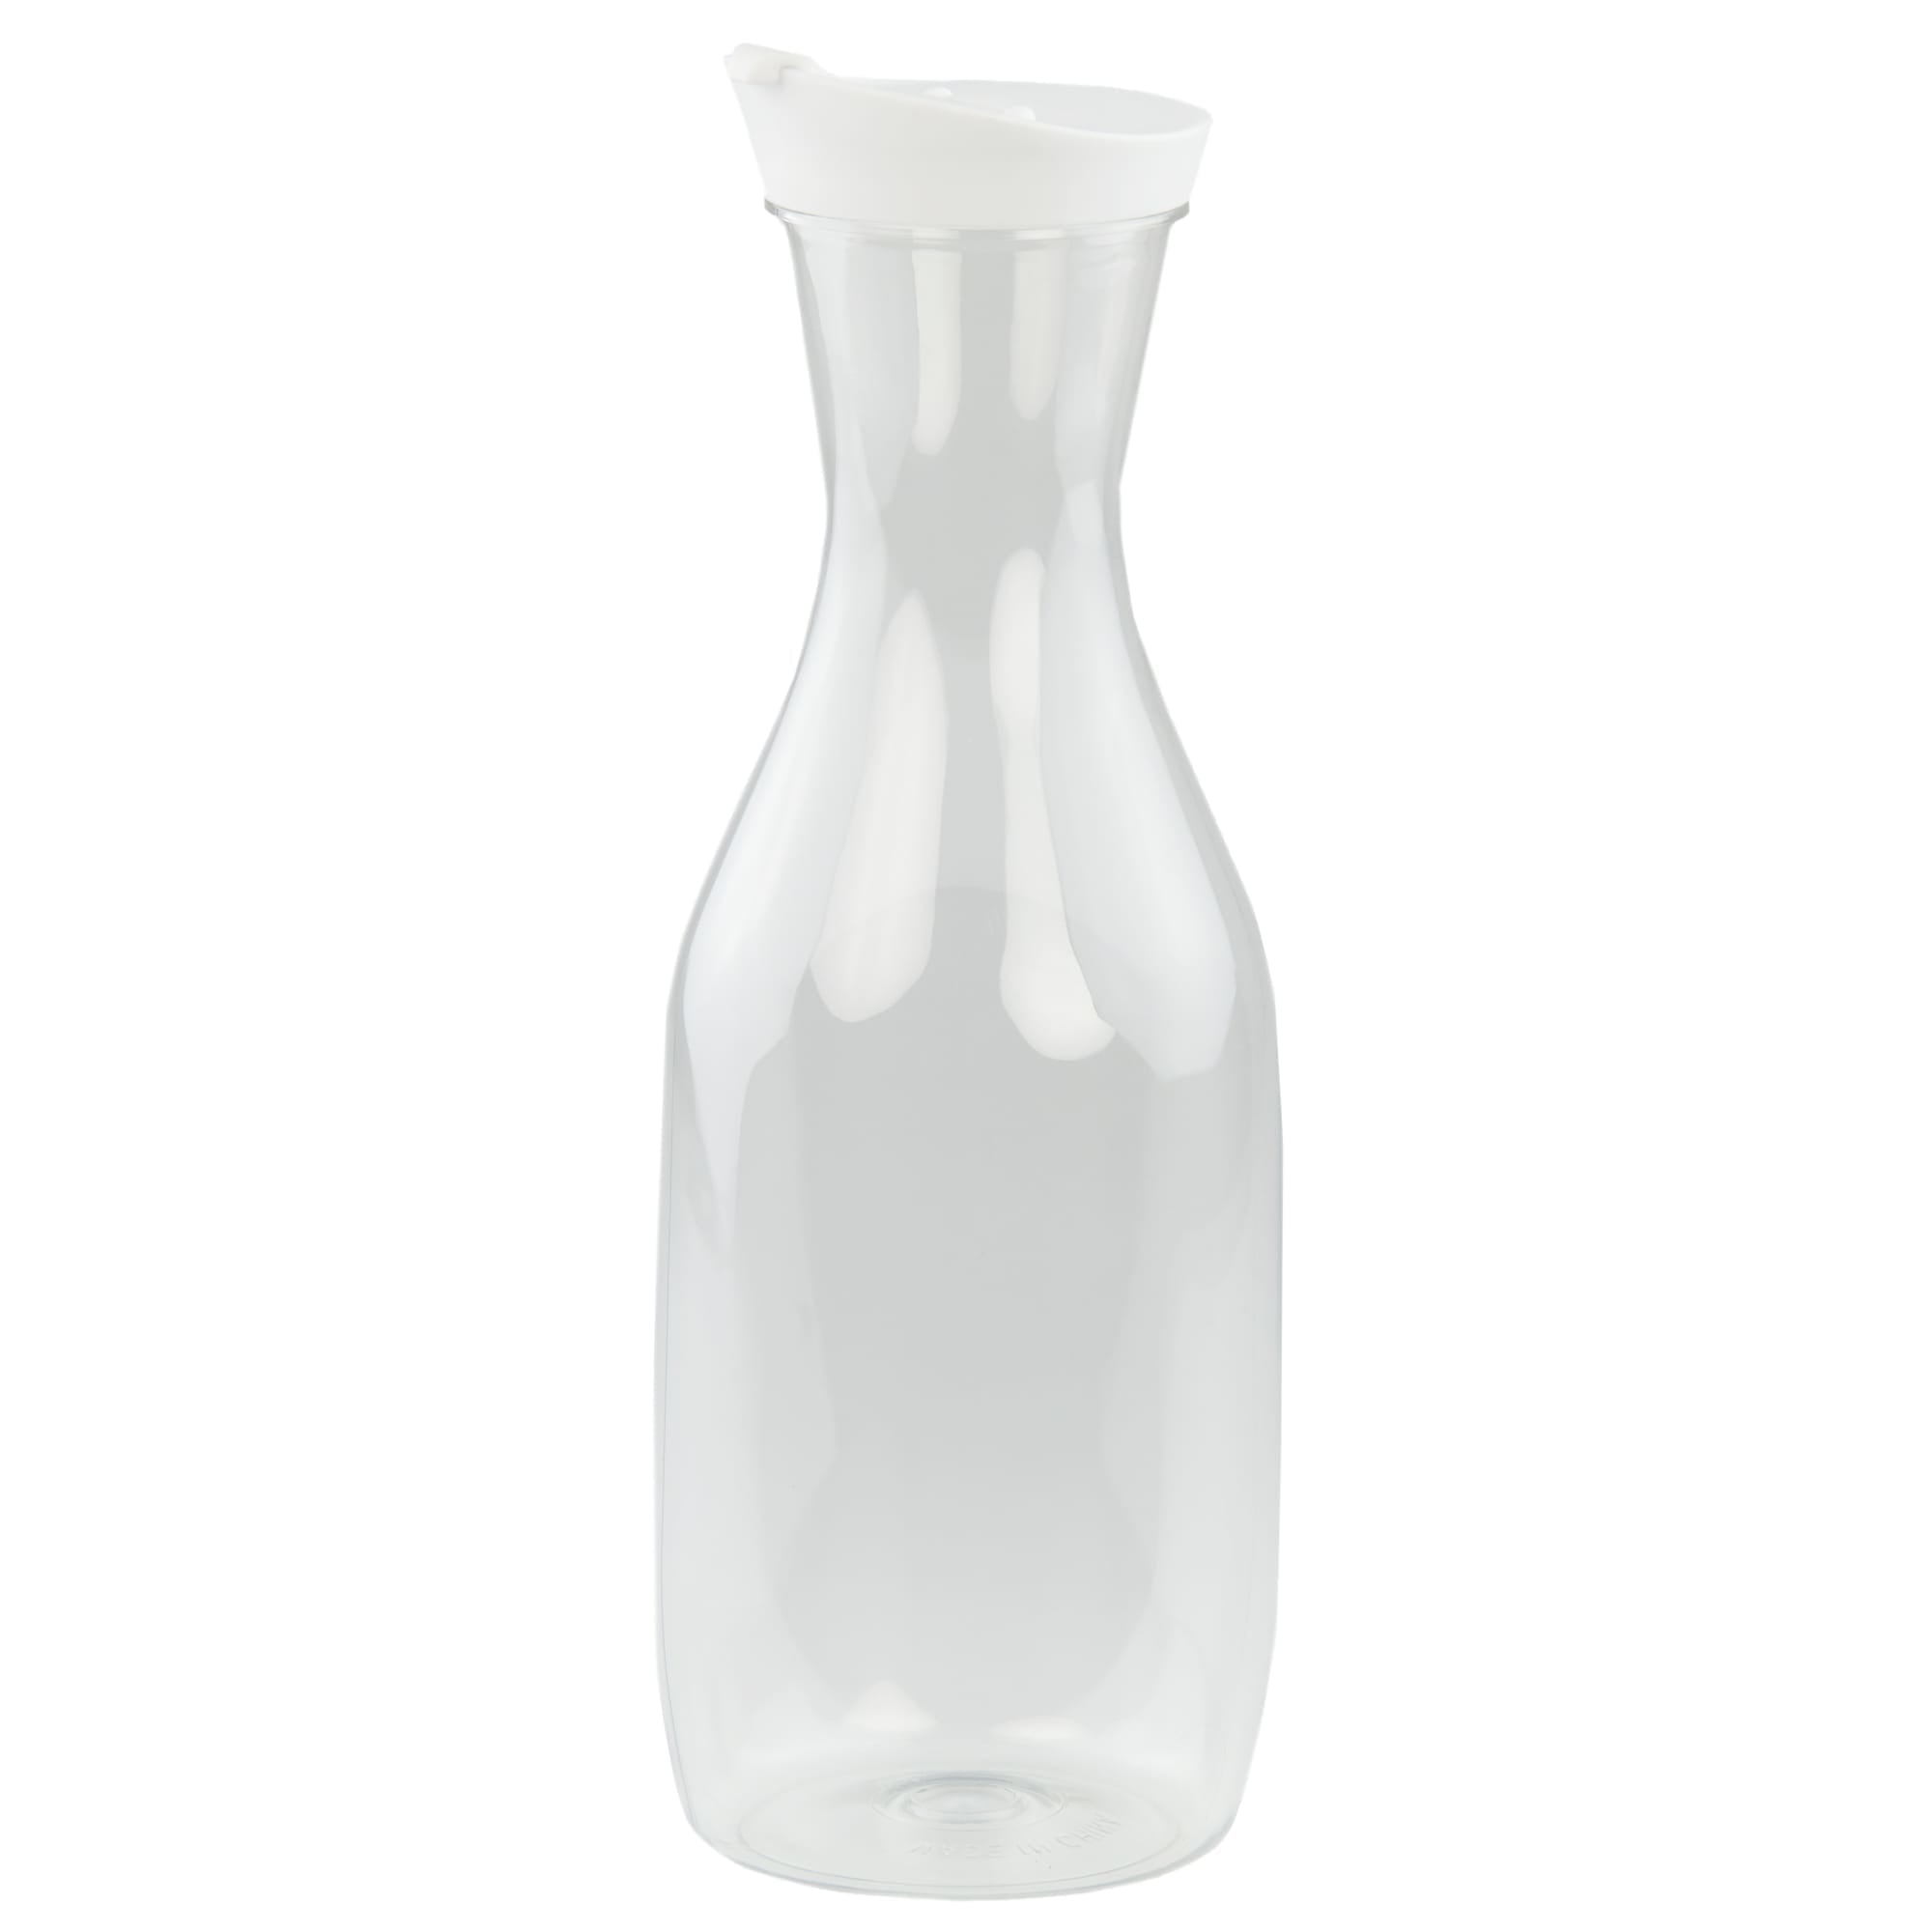 Home Basics 58 oz.  Classic Drip-Proof Plastic Beverage Pitcher, Clear $2.50 EACH, CASE PACK OF 24